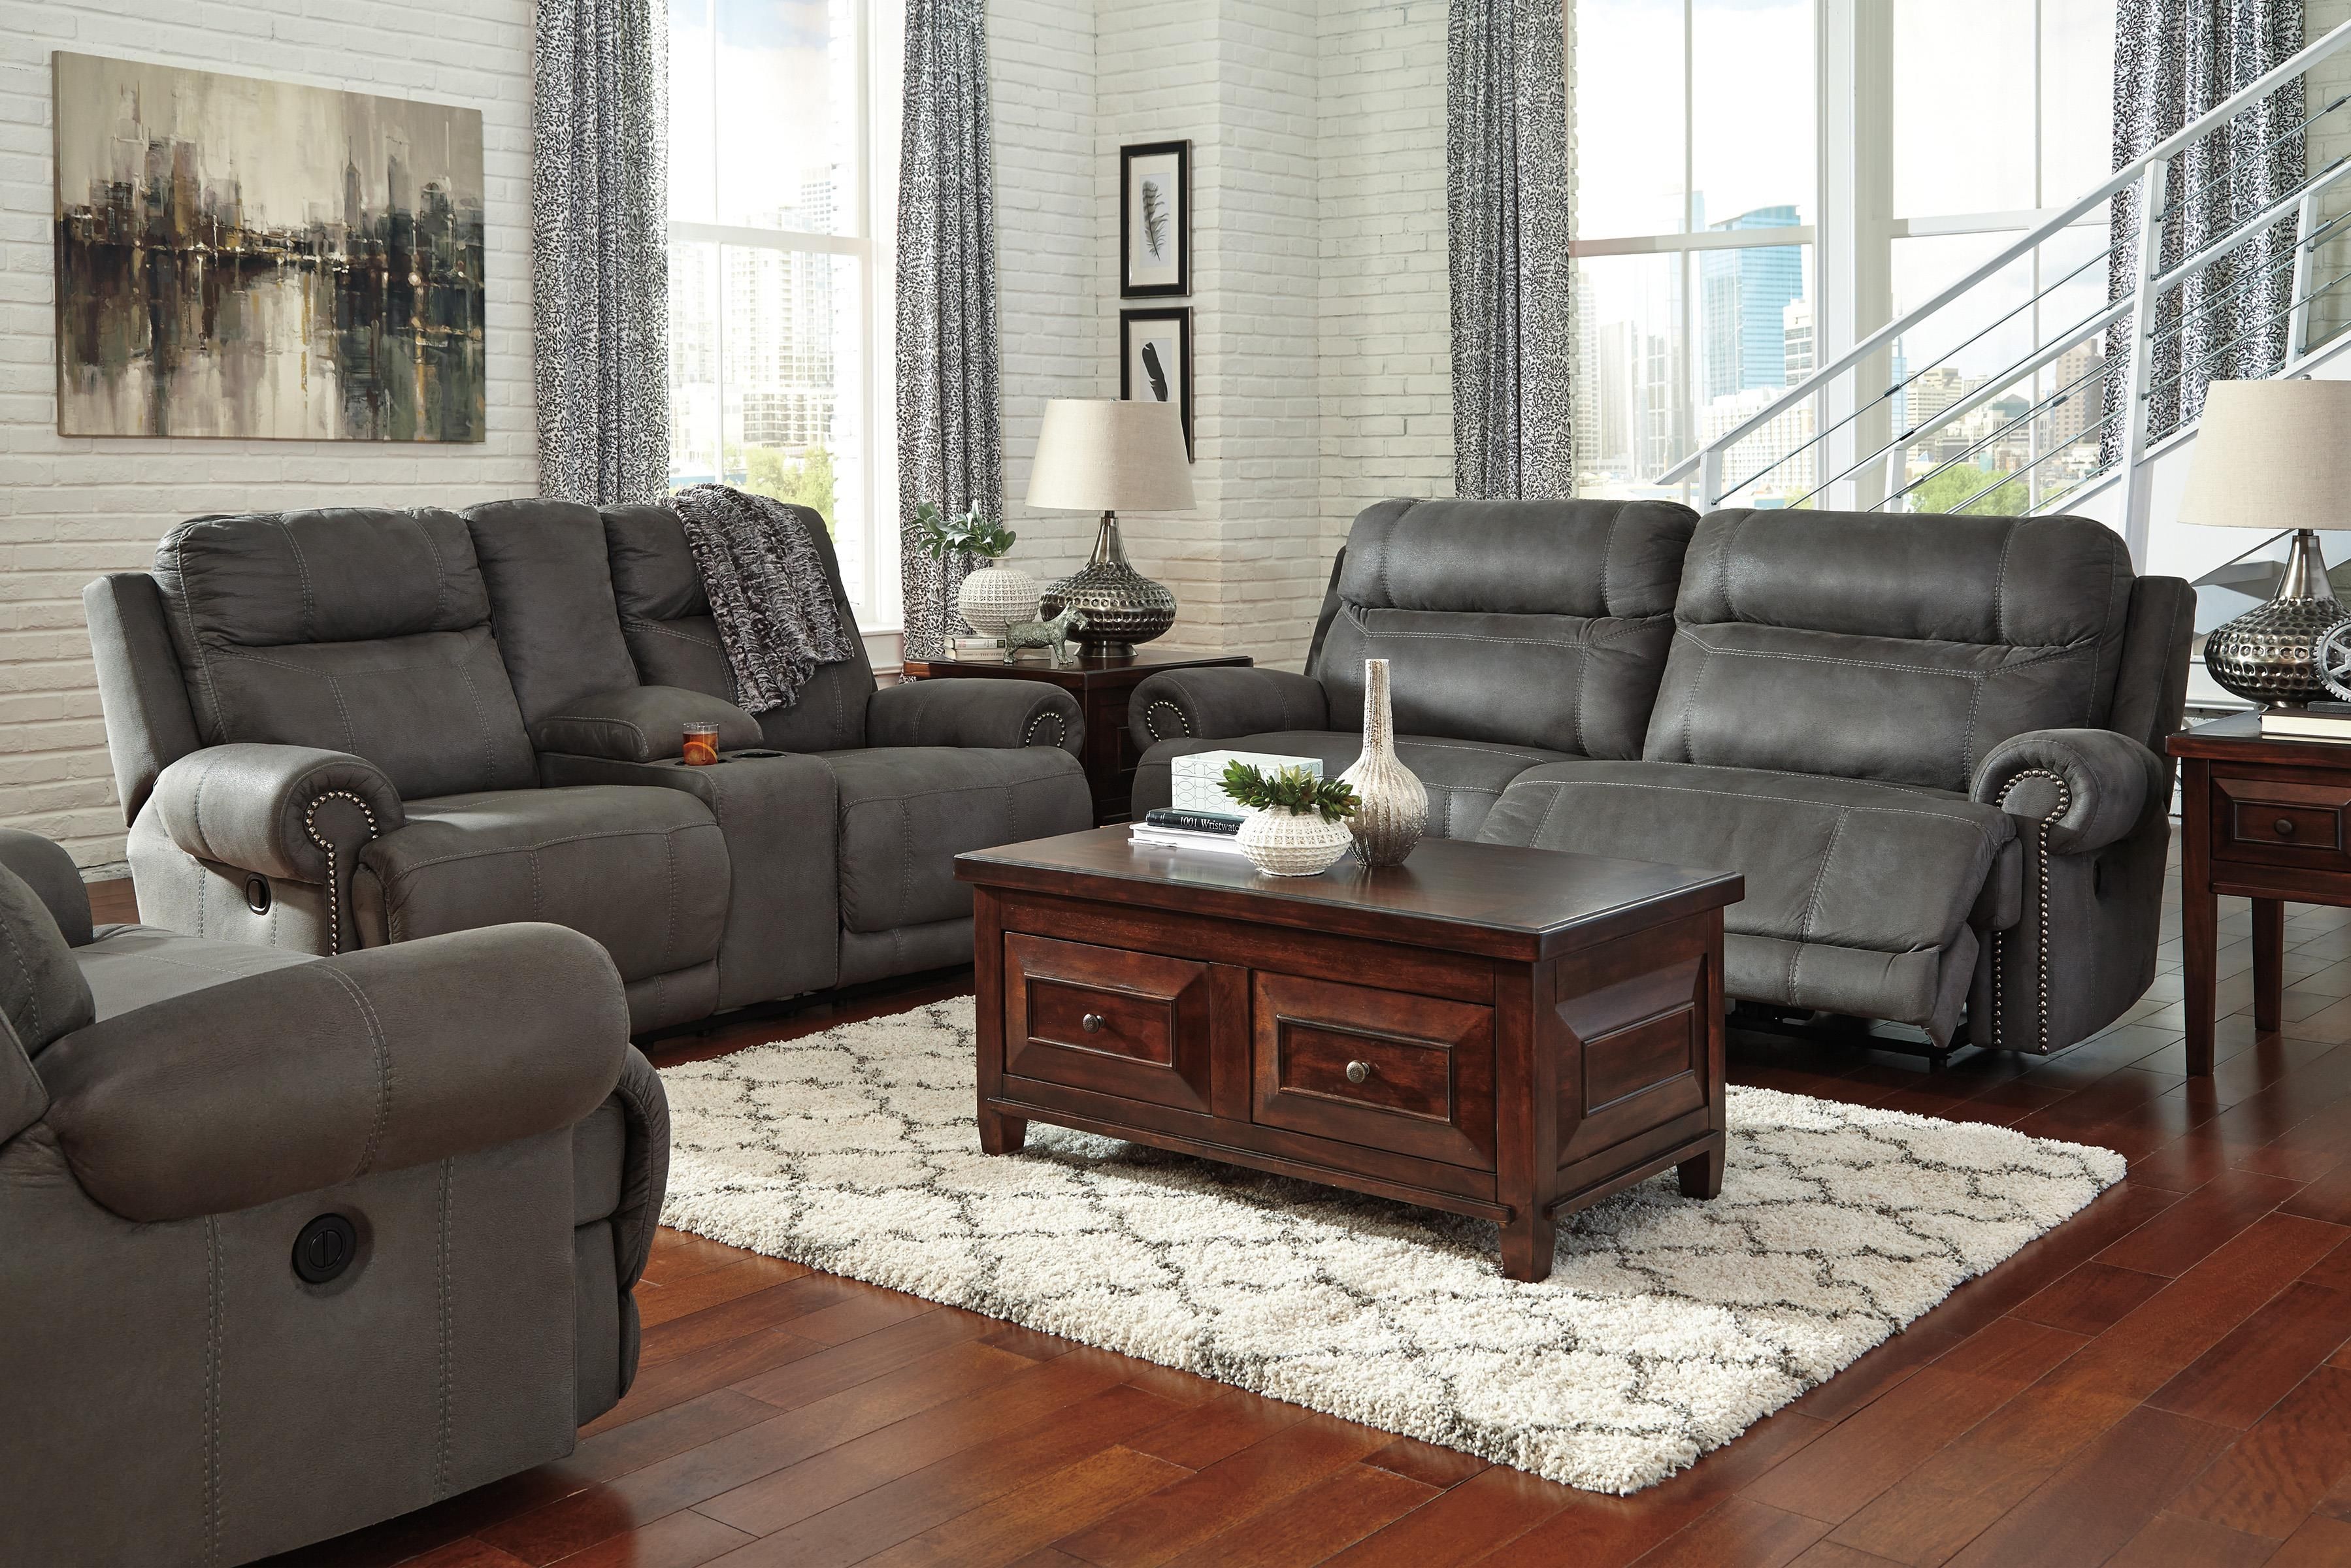 Signature Design Ashley Austere Gray 2 Seat Reclining Sofa With Regard To Ashley Furniture Gray Sofa (View 4 of 15)